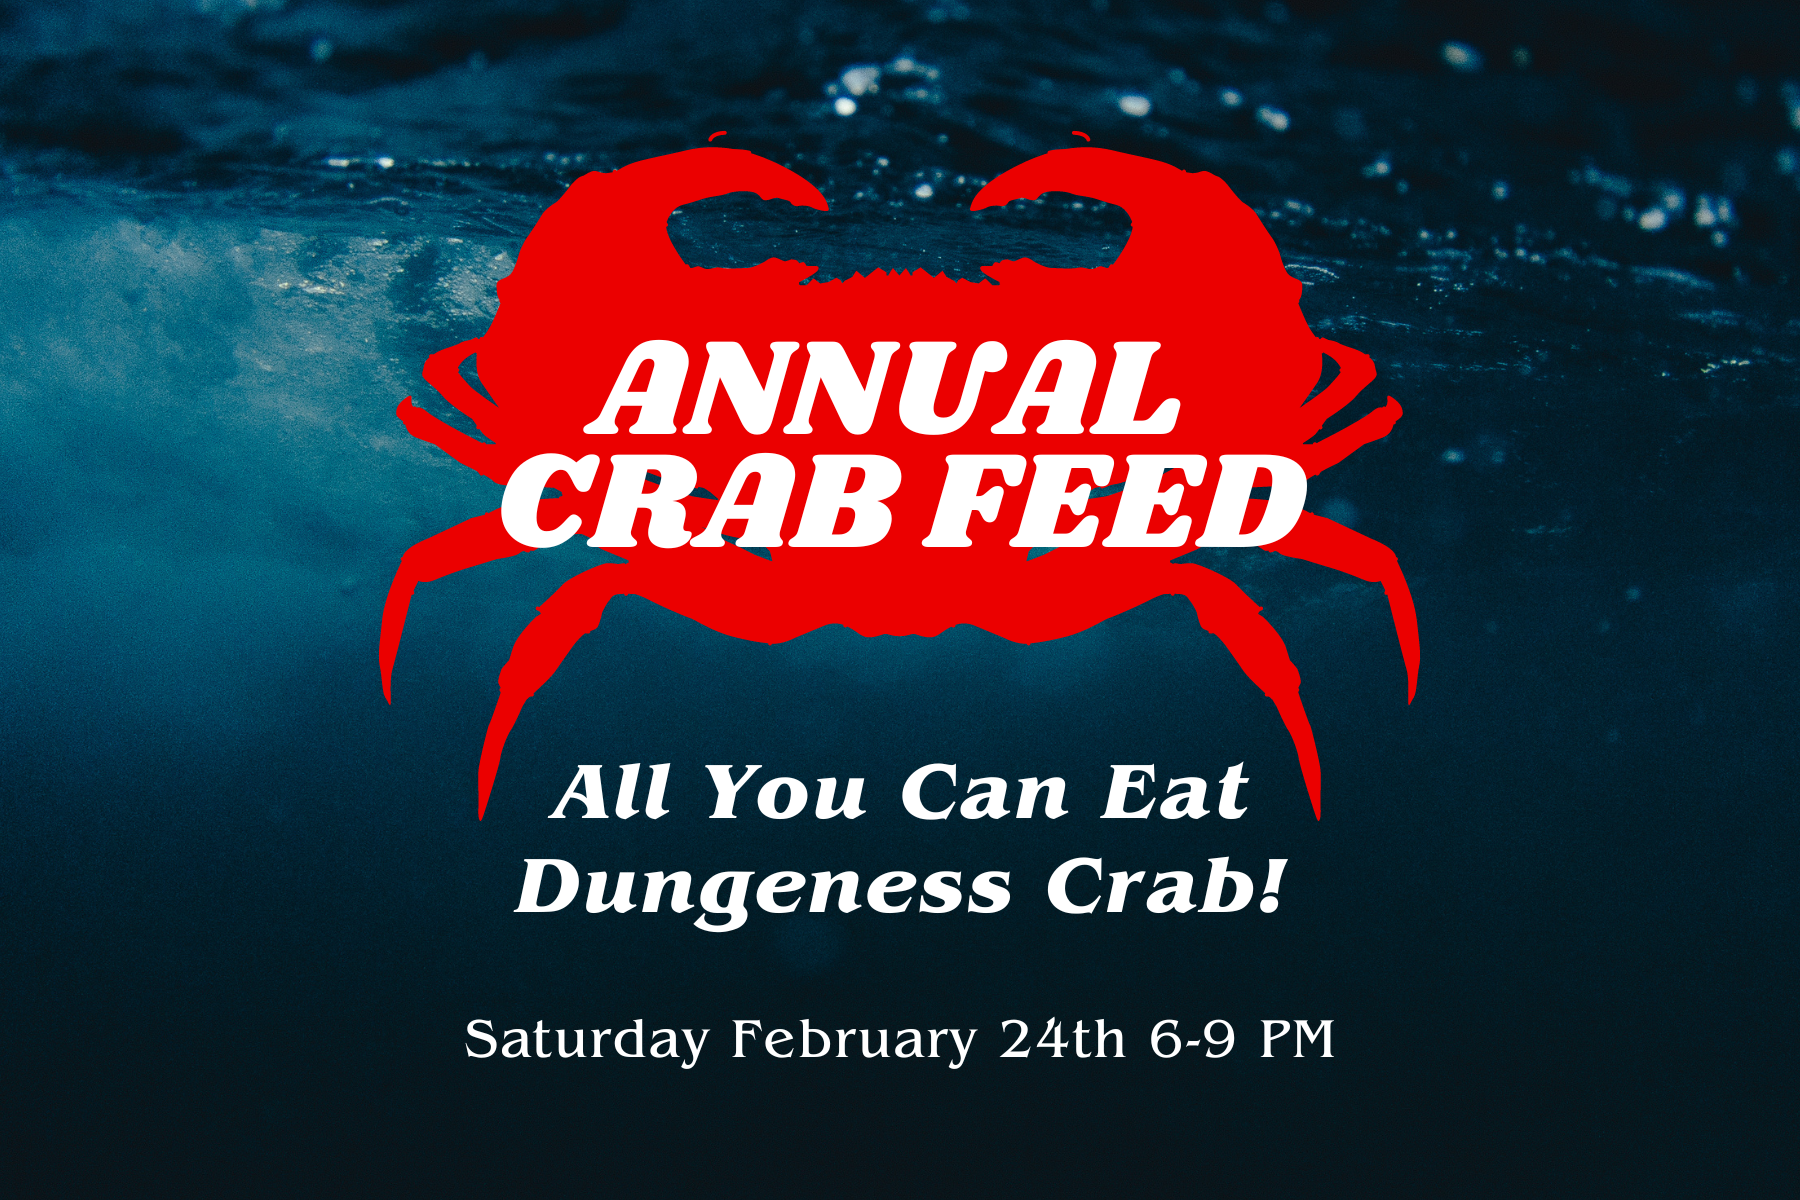 Mather Annual Crab Feed social 6 x 4 in